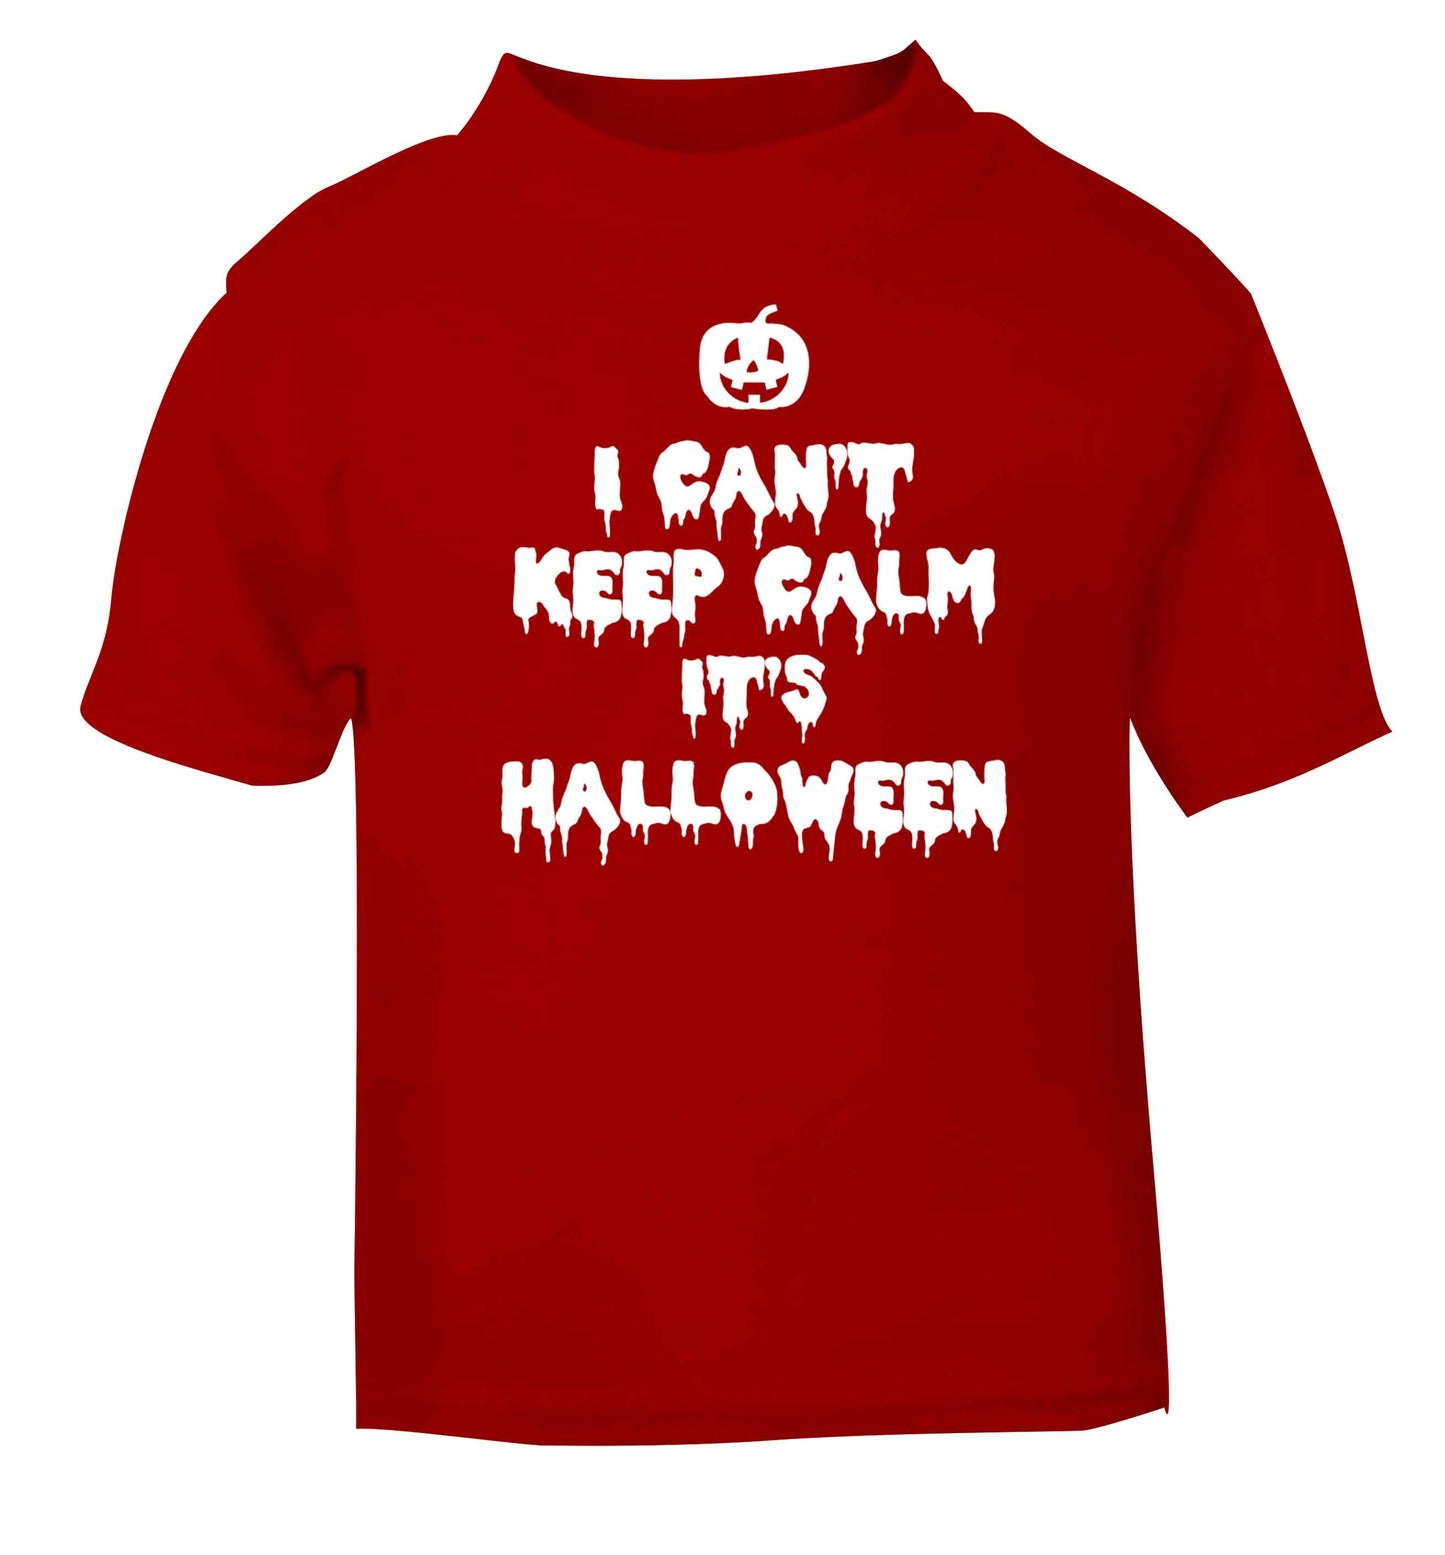 I can't keep calm it's halloween red baby toddler Tshirt 2 Years